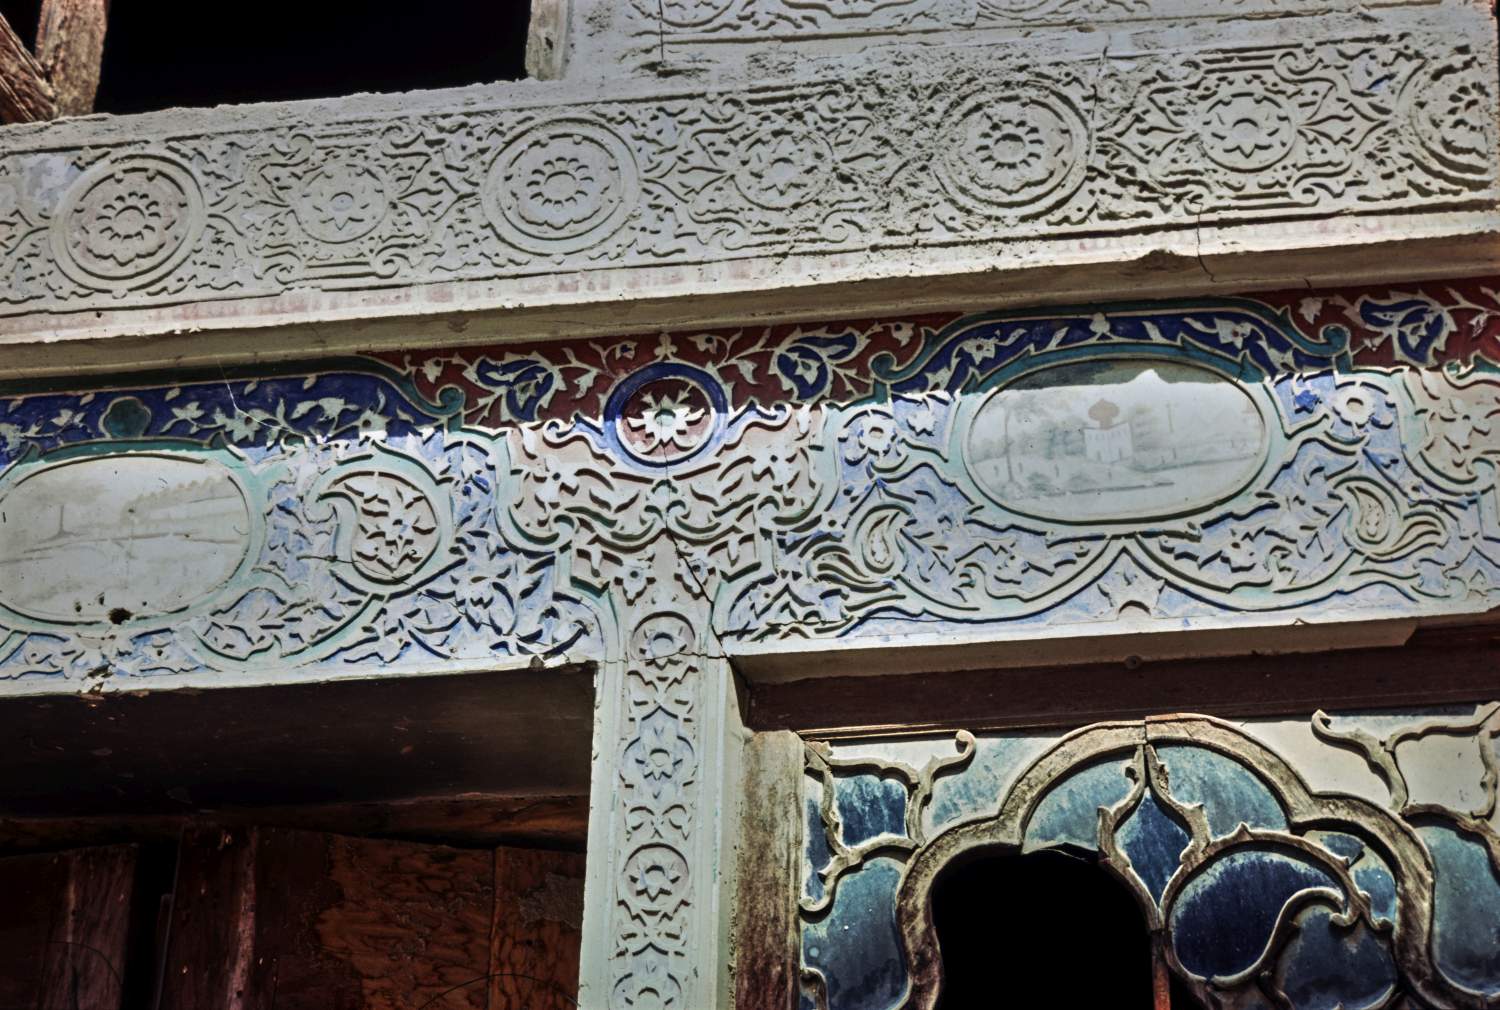 View of carved and painted stucco decoration on facade.